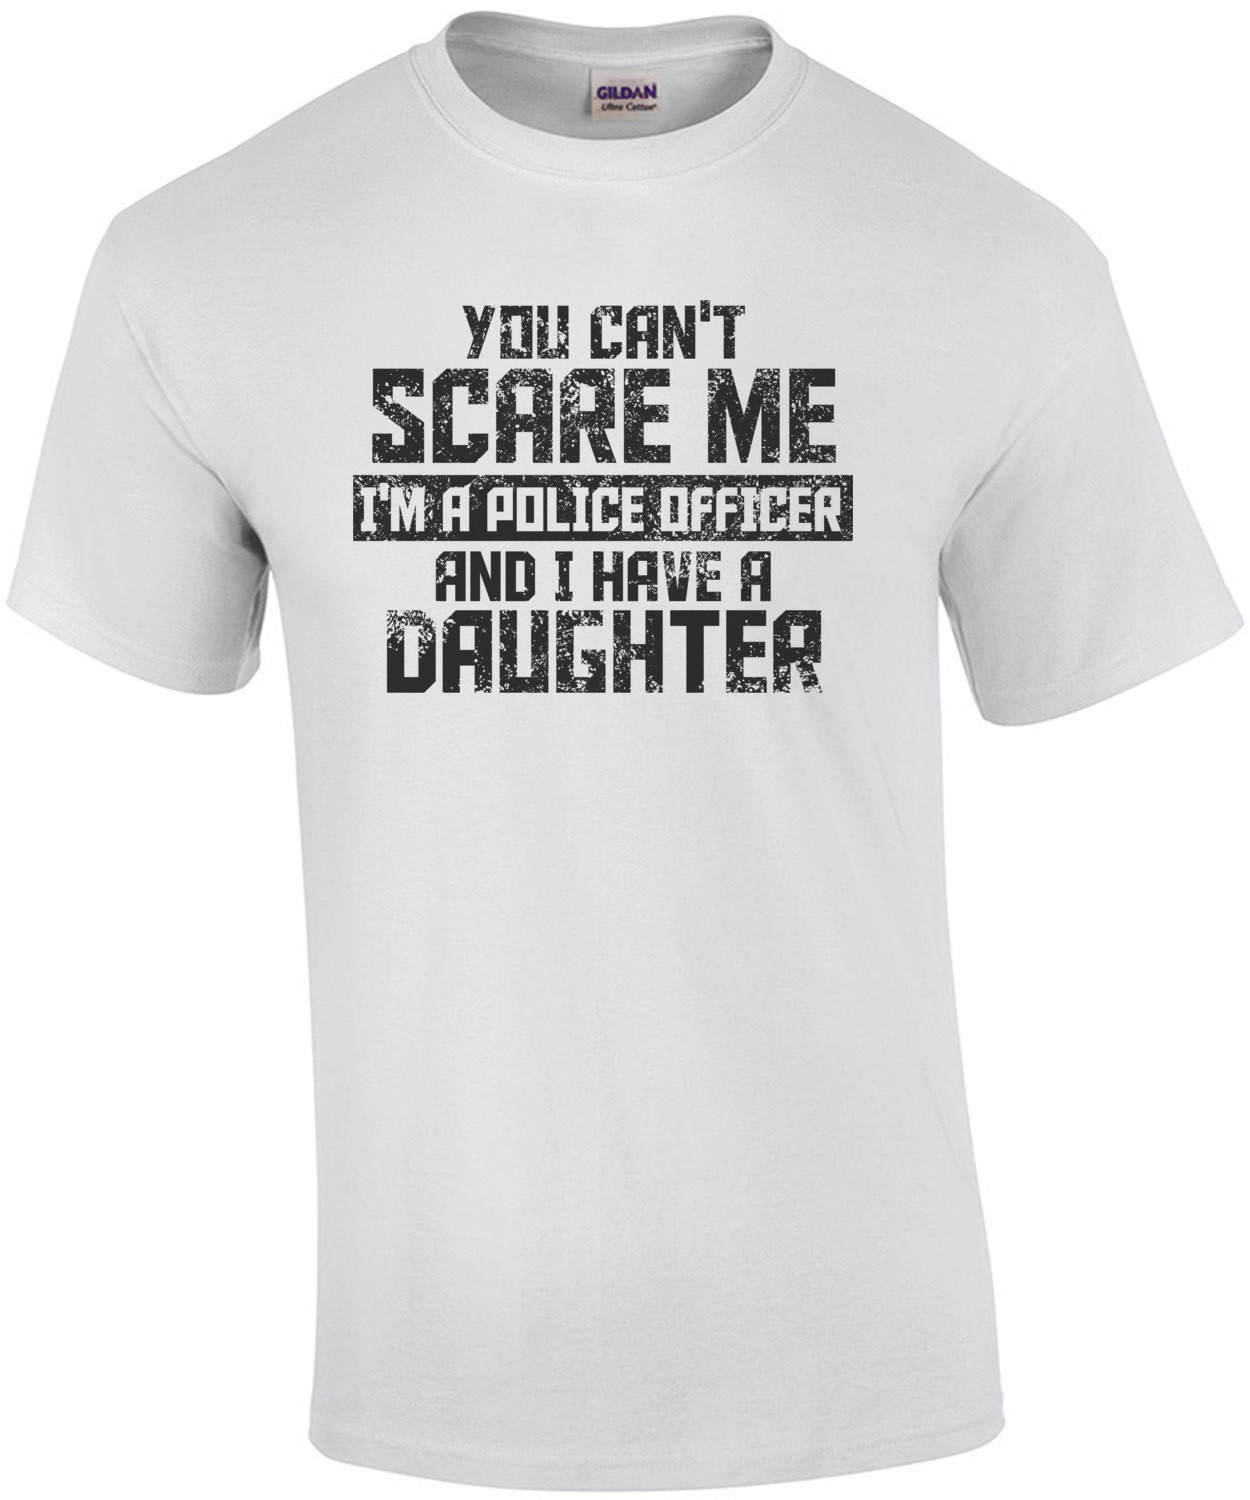 You Cant Scare Me I'm A Police Officer And I Have A Daughter T-Shirt